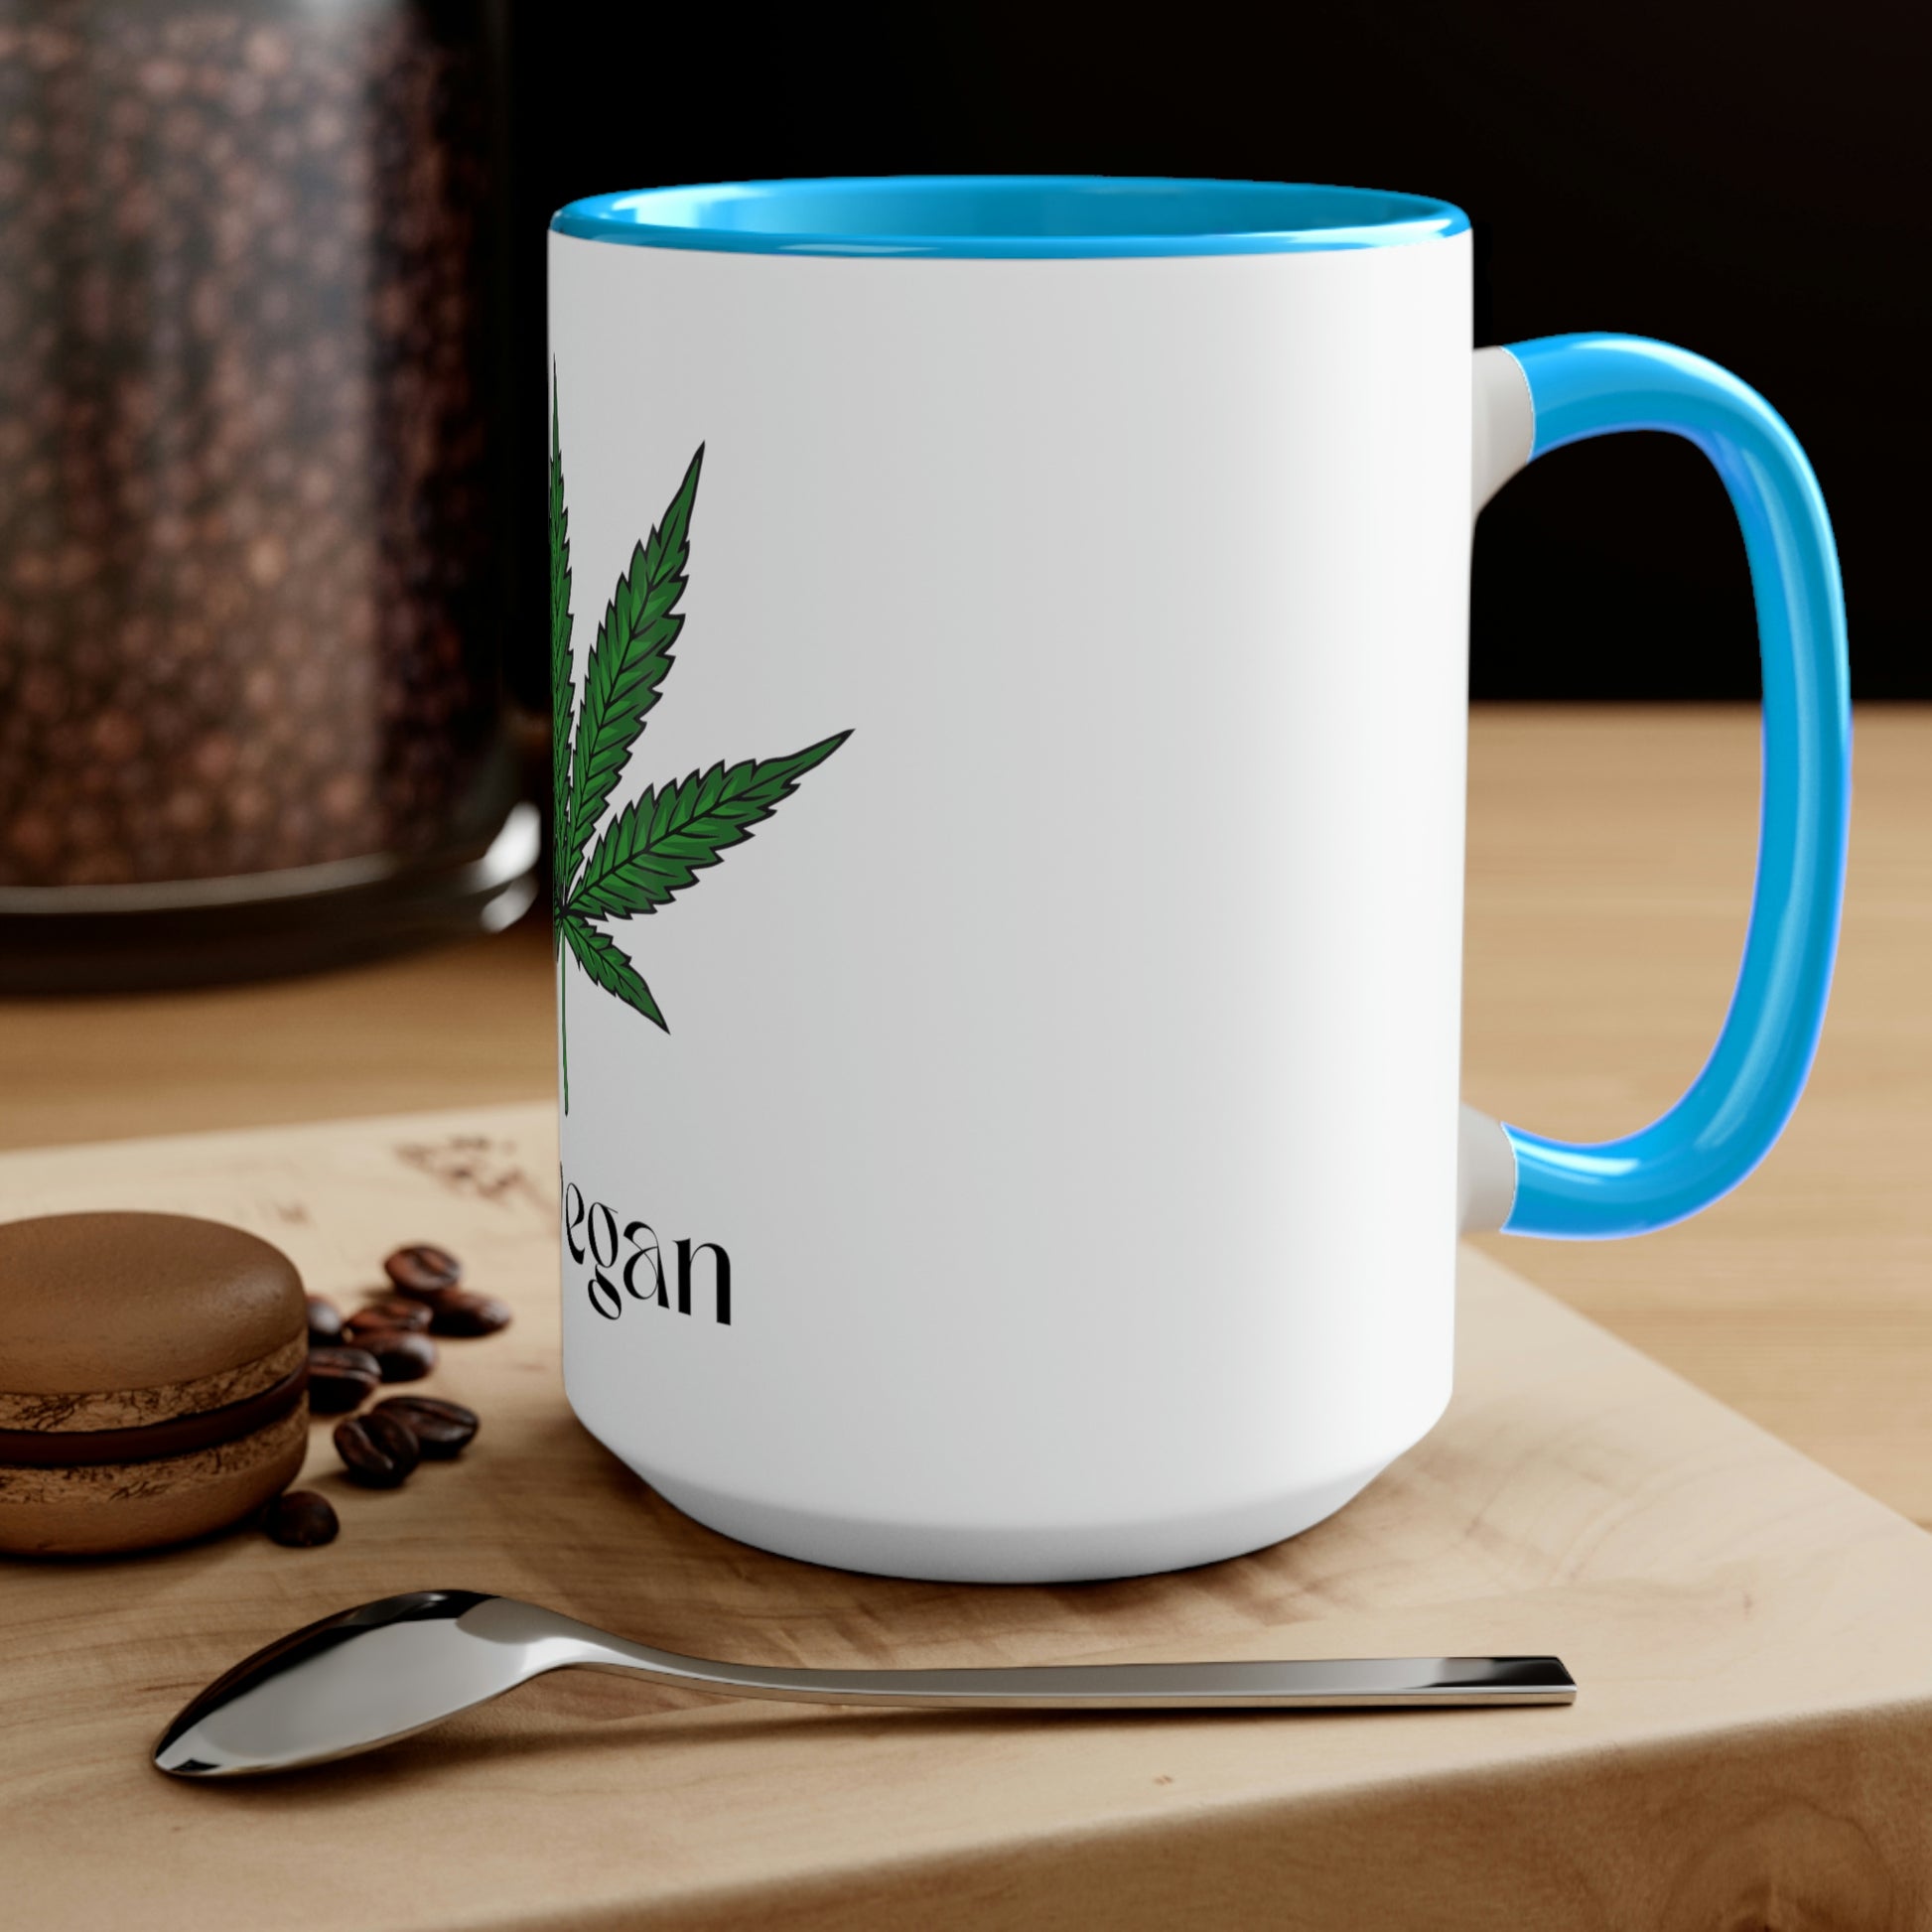 A white and light blue "I'm Vegan" cannabis coffee mug on a wooden table with a spoon and a macaroon